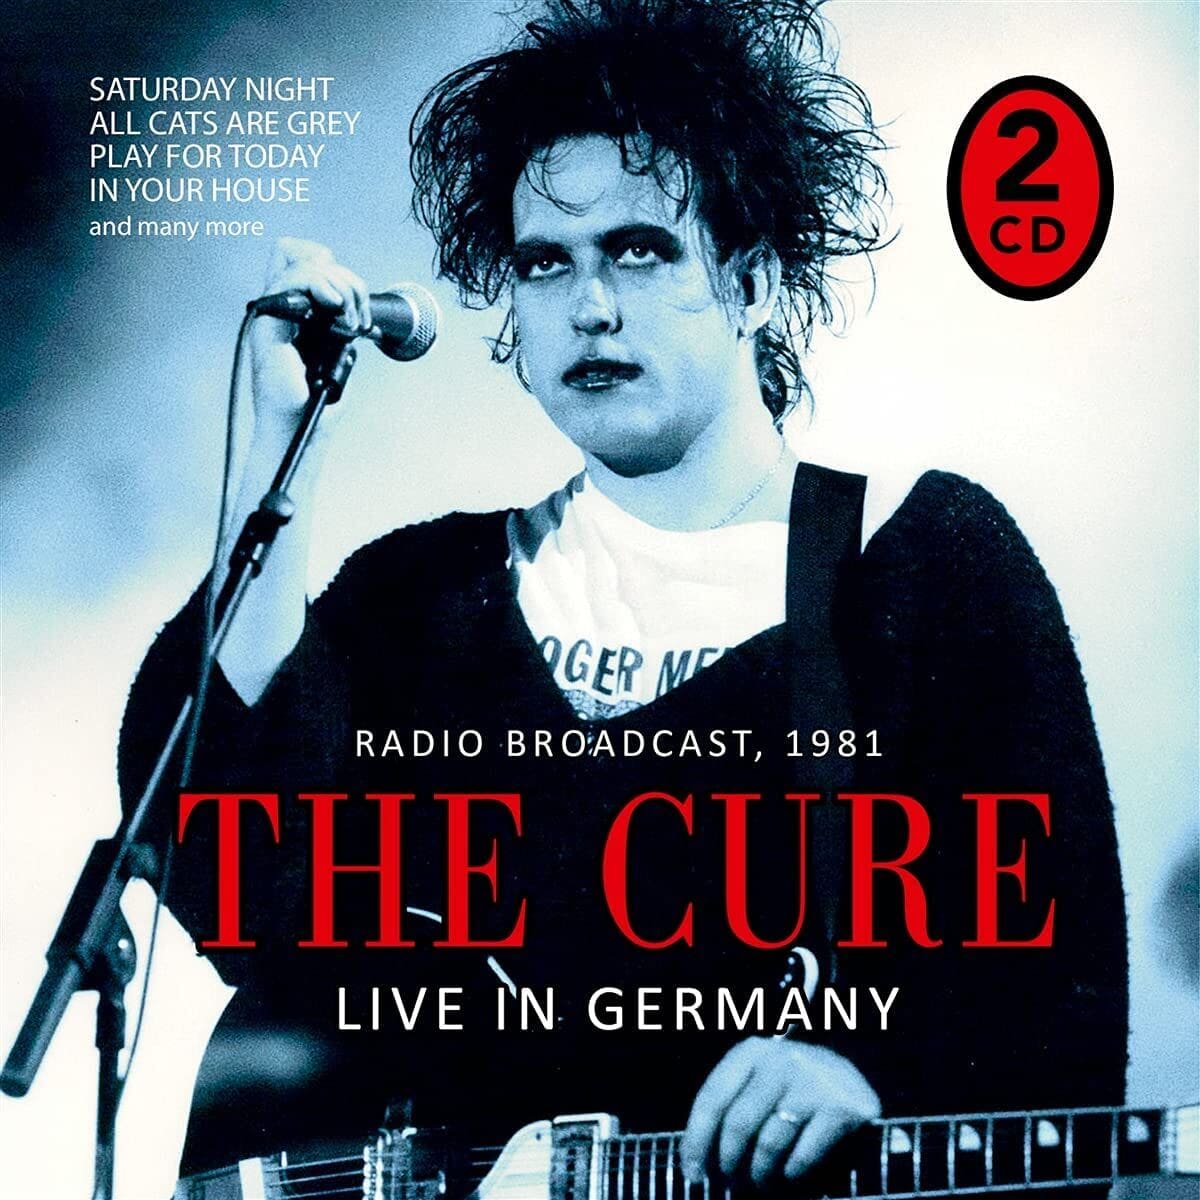 'The Cure - Radio Broadcast/Live in Germany 1981' 2CD bootleg gets widespread distribution